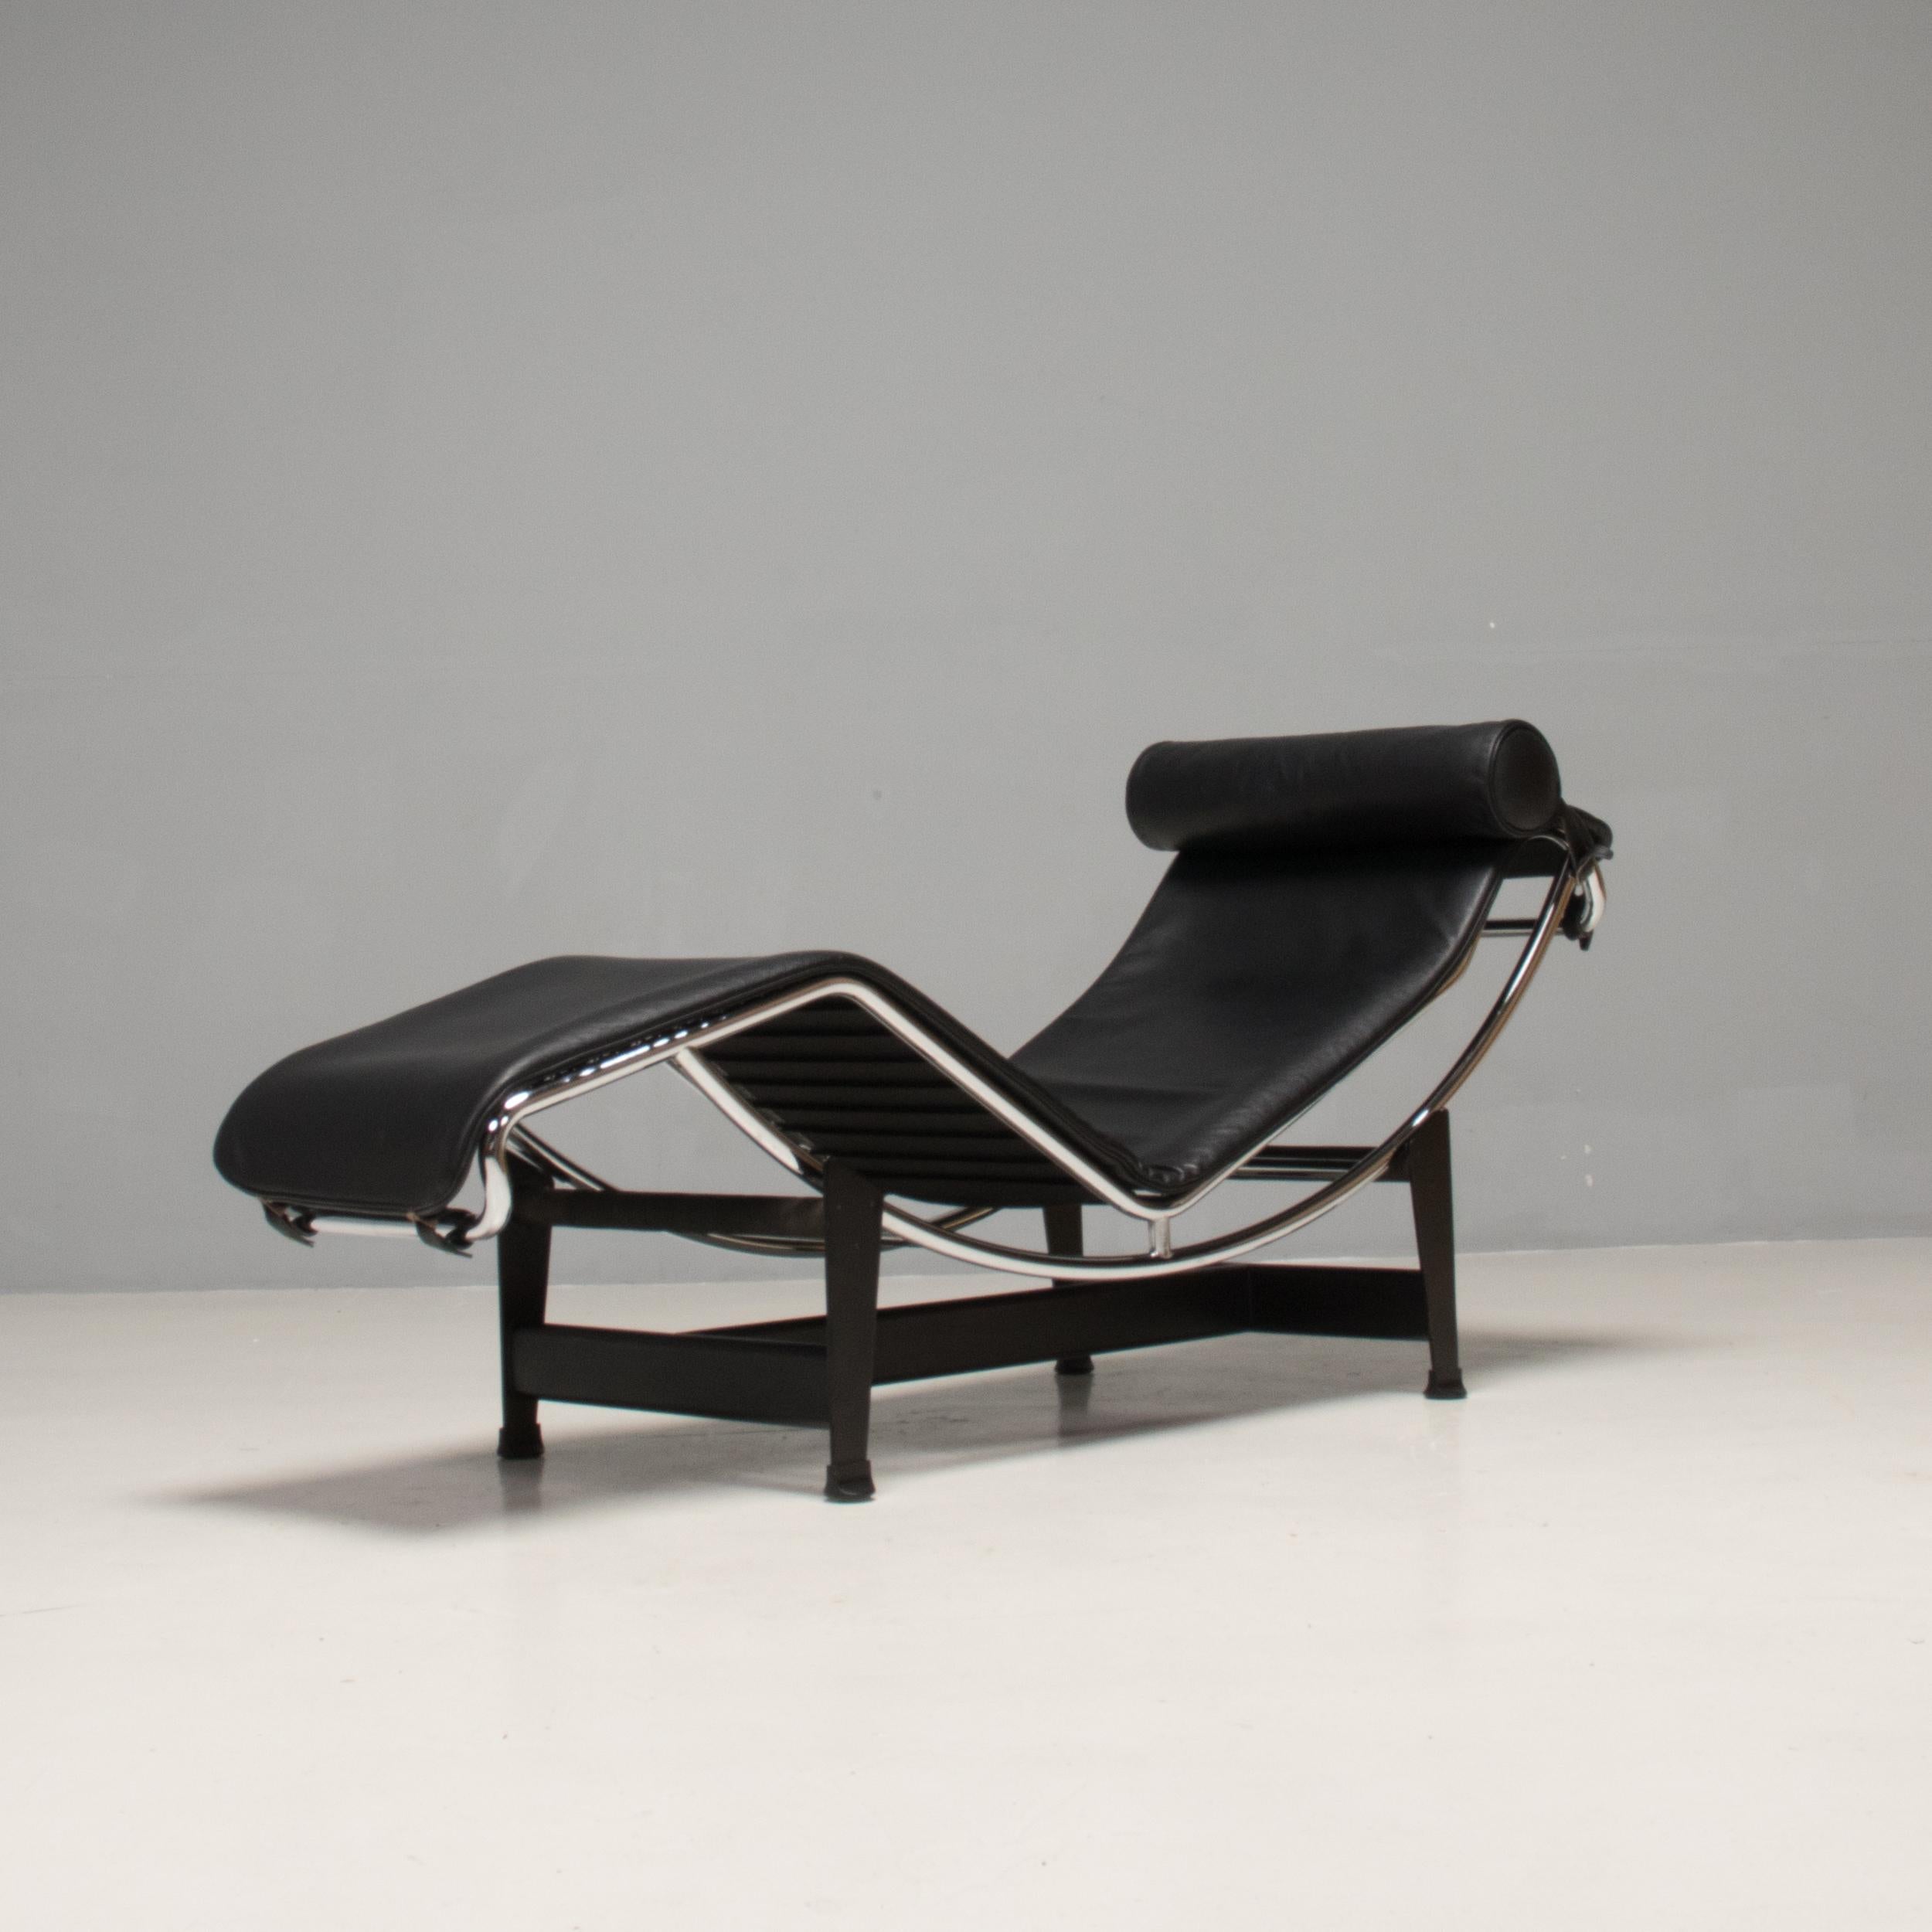 Italian Cassina Le Corbusier, Pierre Jeanneret & Charlotte Perriand LC4 Chaise Lounge